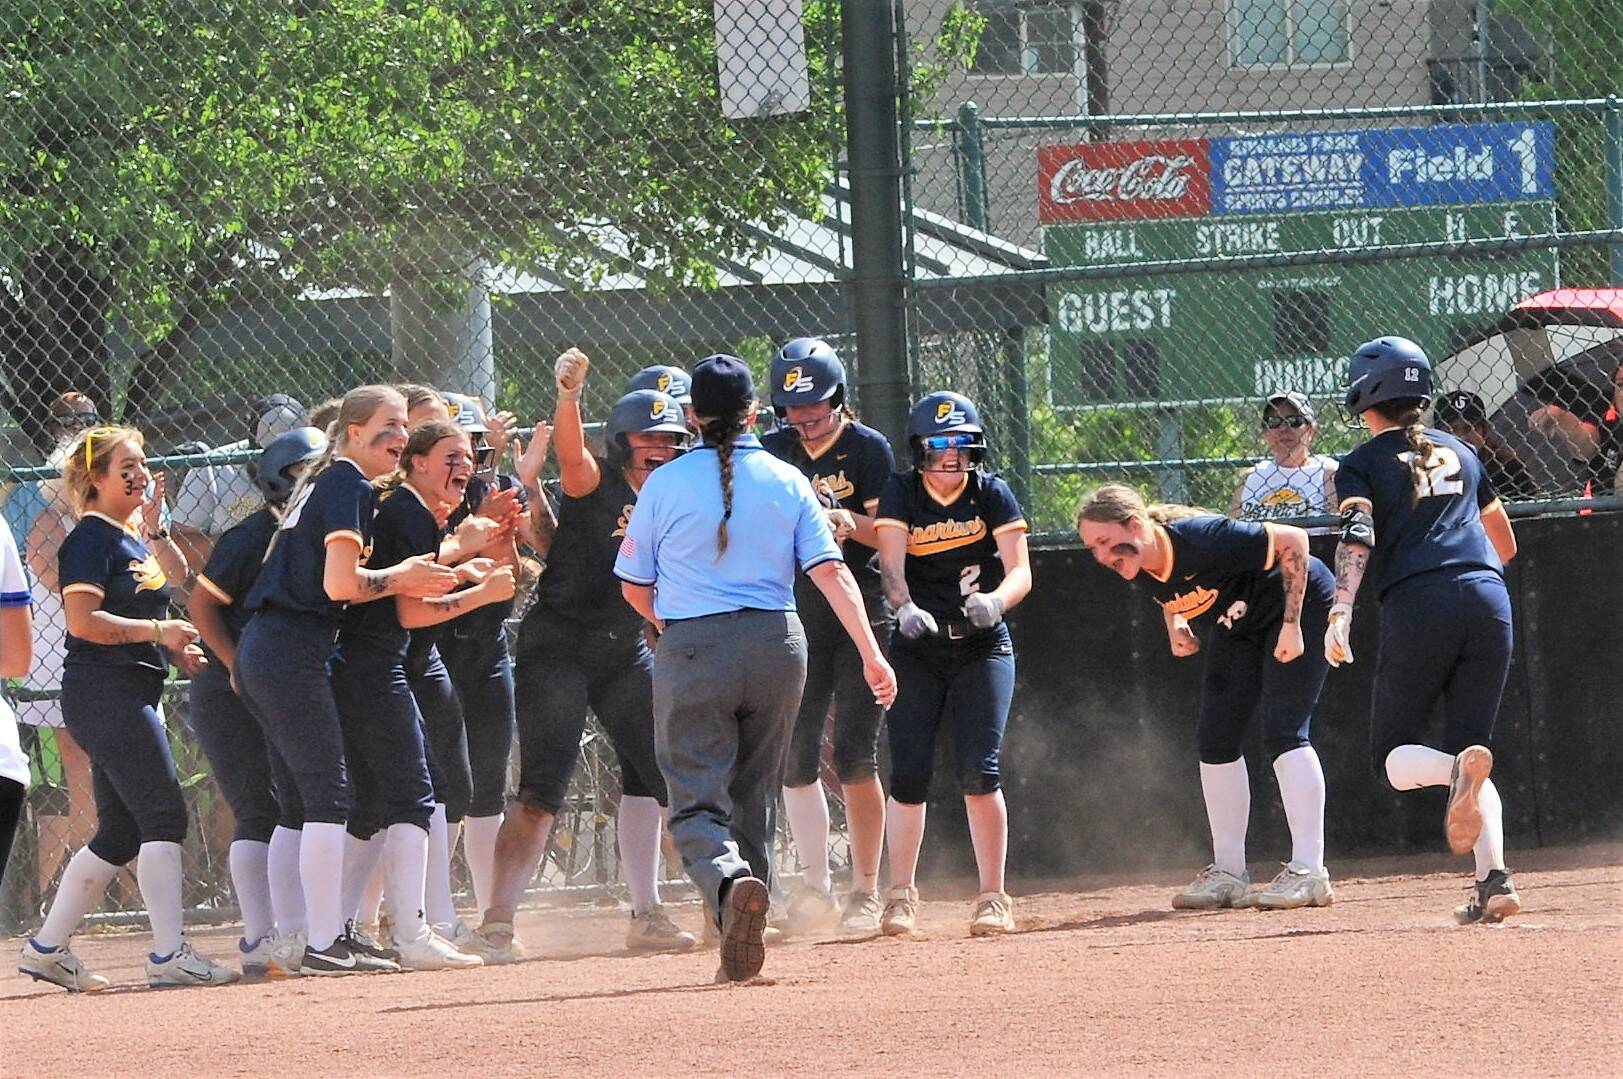 Spartan teammates greet Chloe Gaydesk-St. John at home plate after her home run against Warden Friday during the State 2B softball championships. Photo by Lonnie Archibald